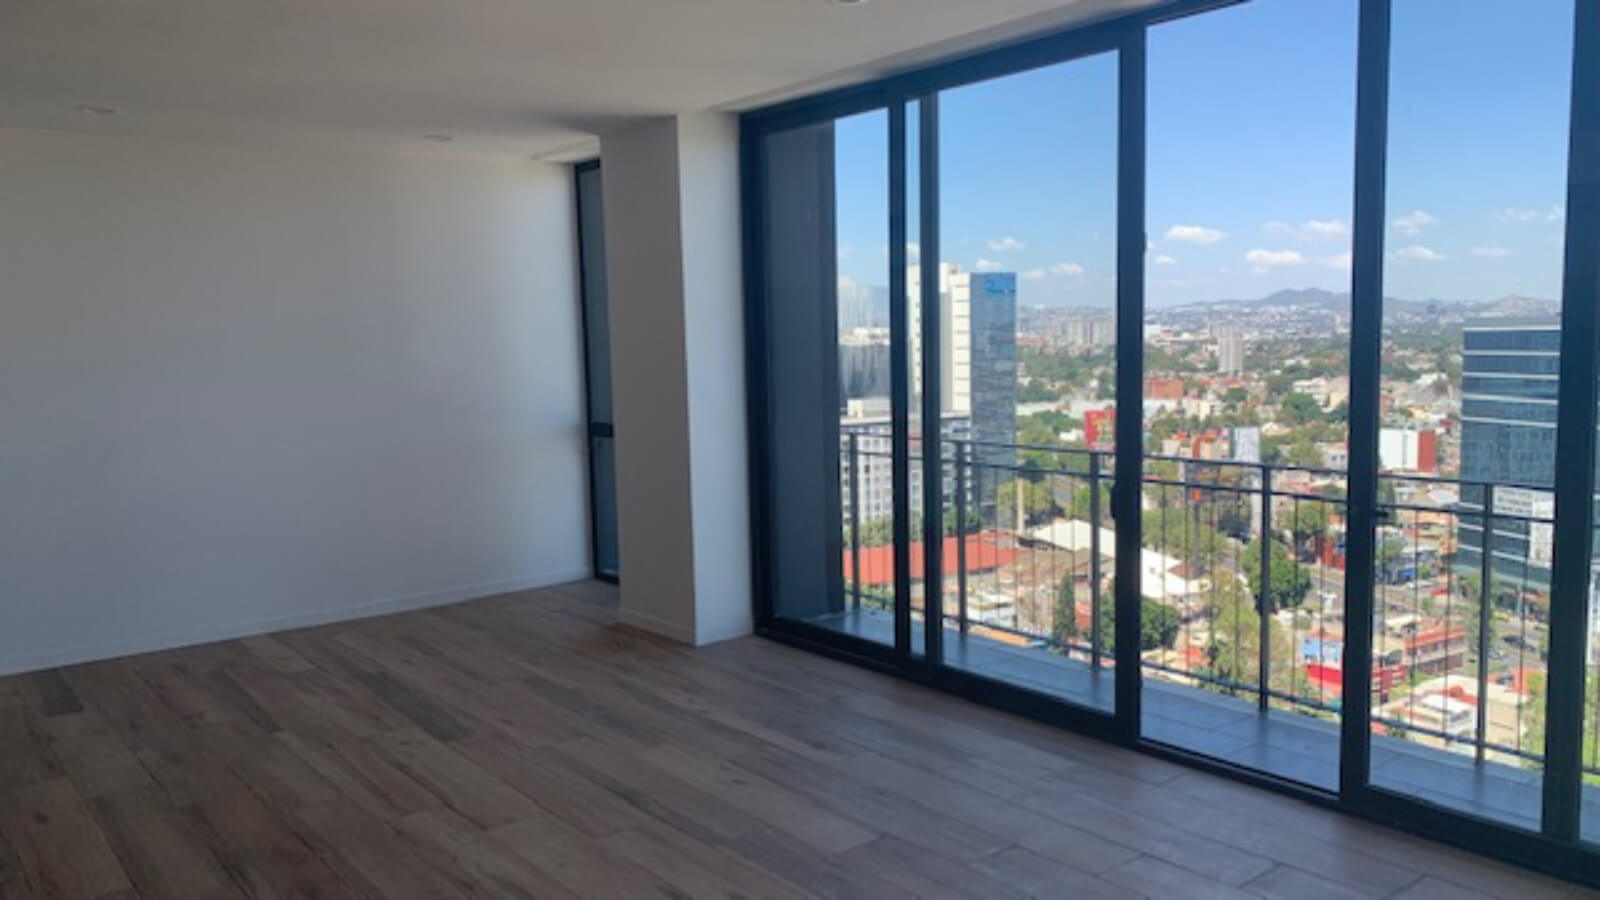 Apartment with terrace, rooftop, pool, immediate delivery, Polanco for sale.